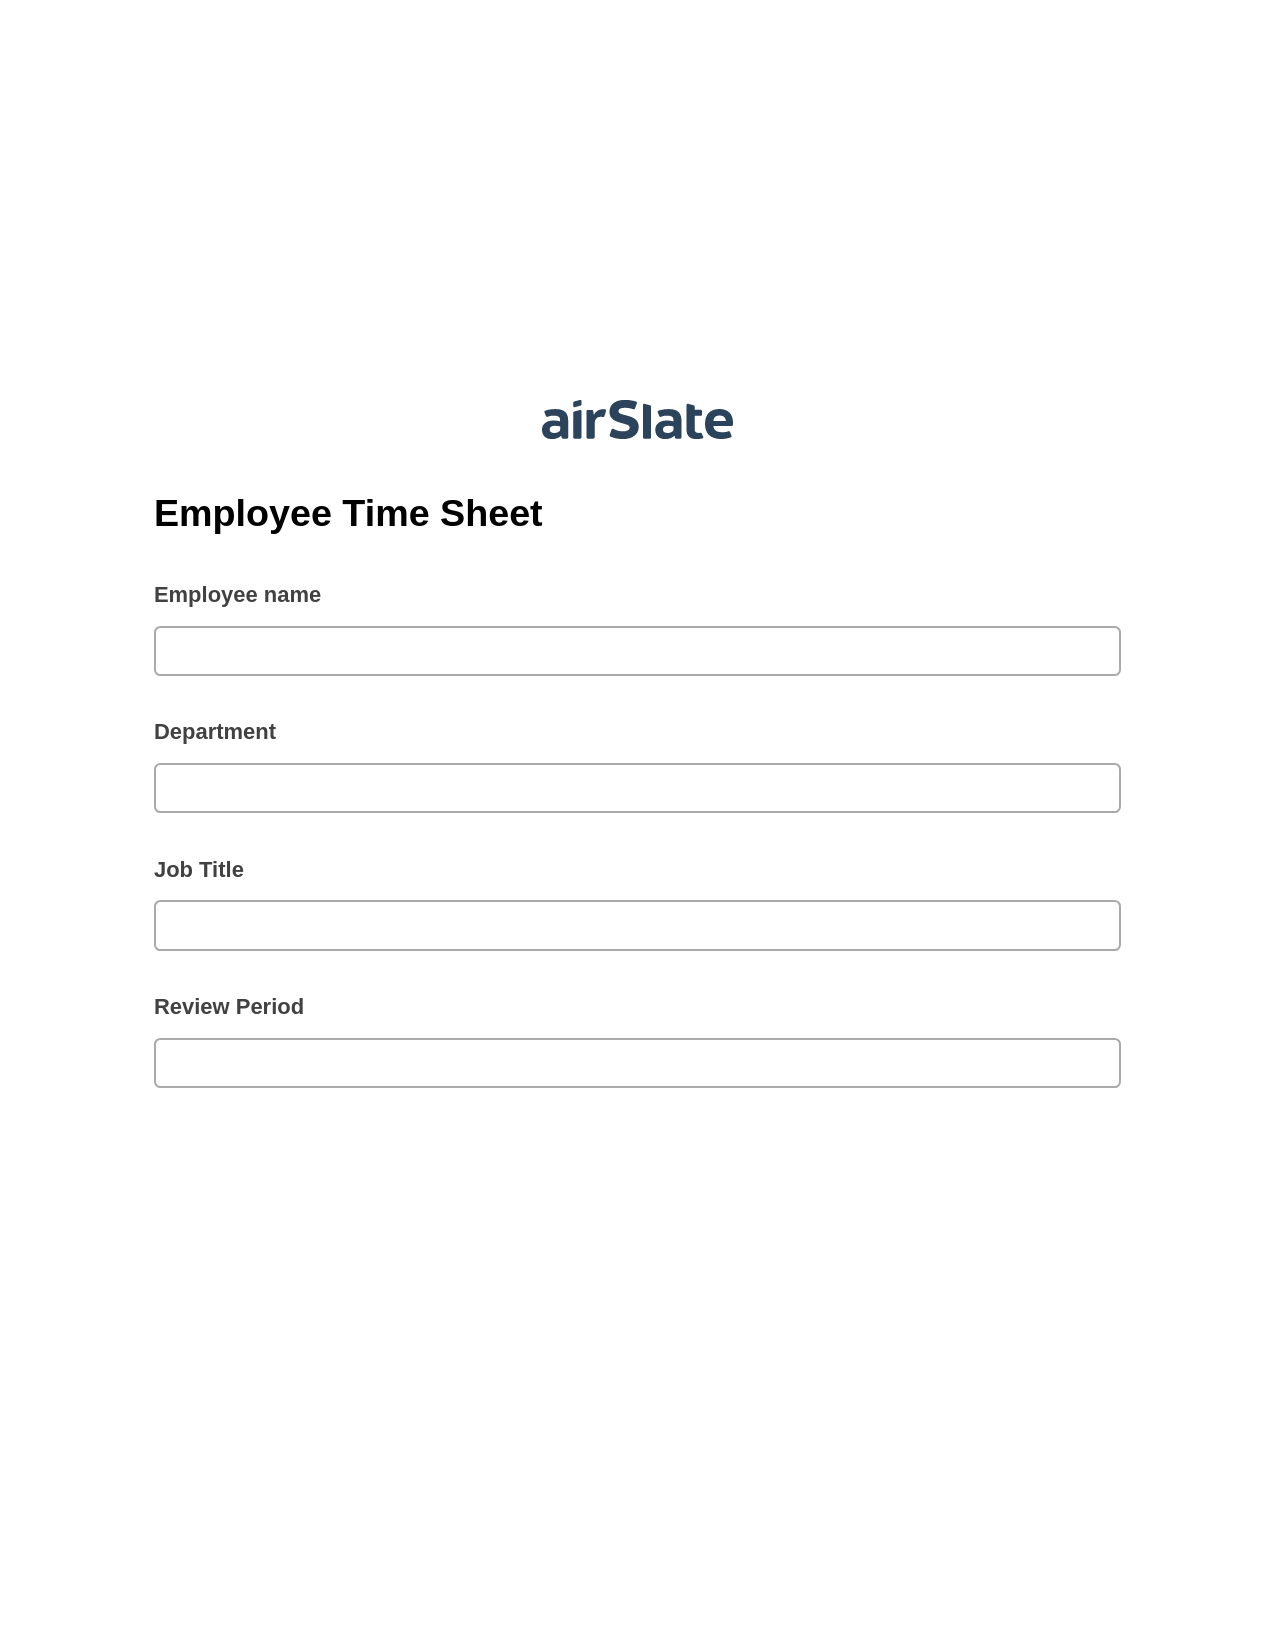 Employee Time Sheet Pre-fill Dropdowns from Excel Bot, Create slate addon, Export to NetSuite Bot